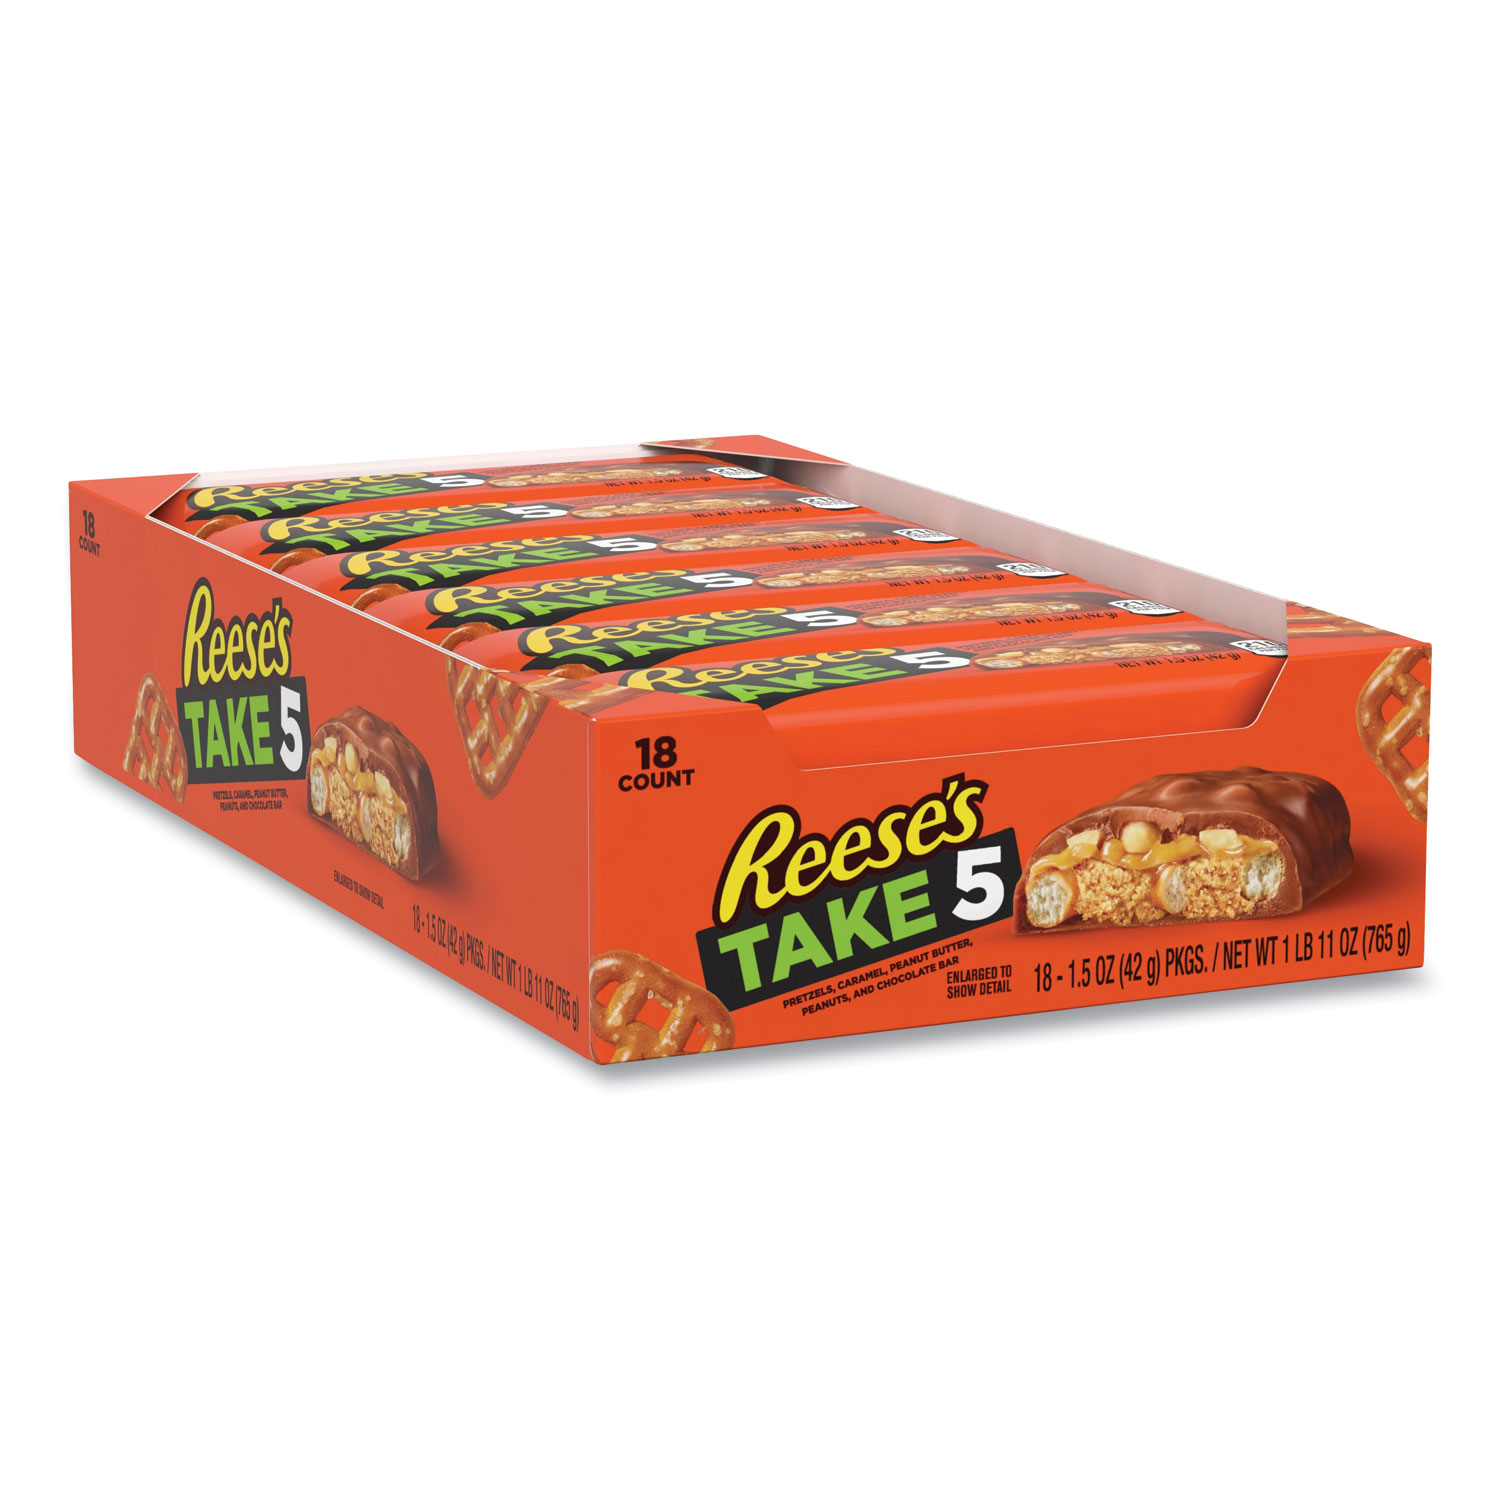  Reese's 38645 TAKE5 Candy Bar, 1.5 oz Bar, 18 Bars/Box, Free Delivery in 1-4 Business Days (GRR24600160) 